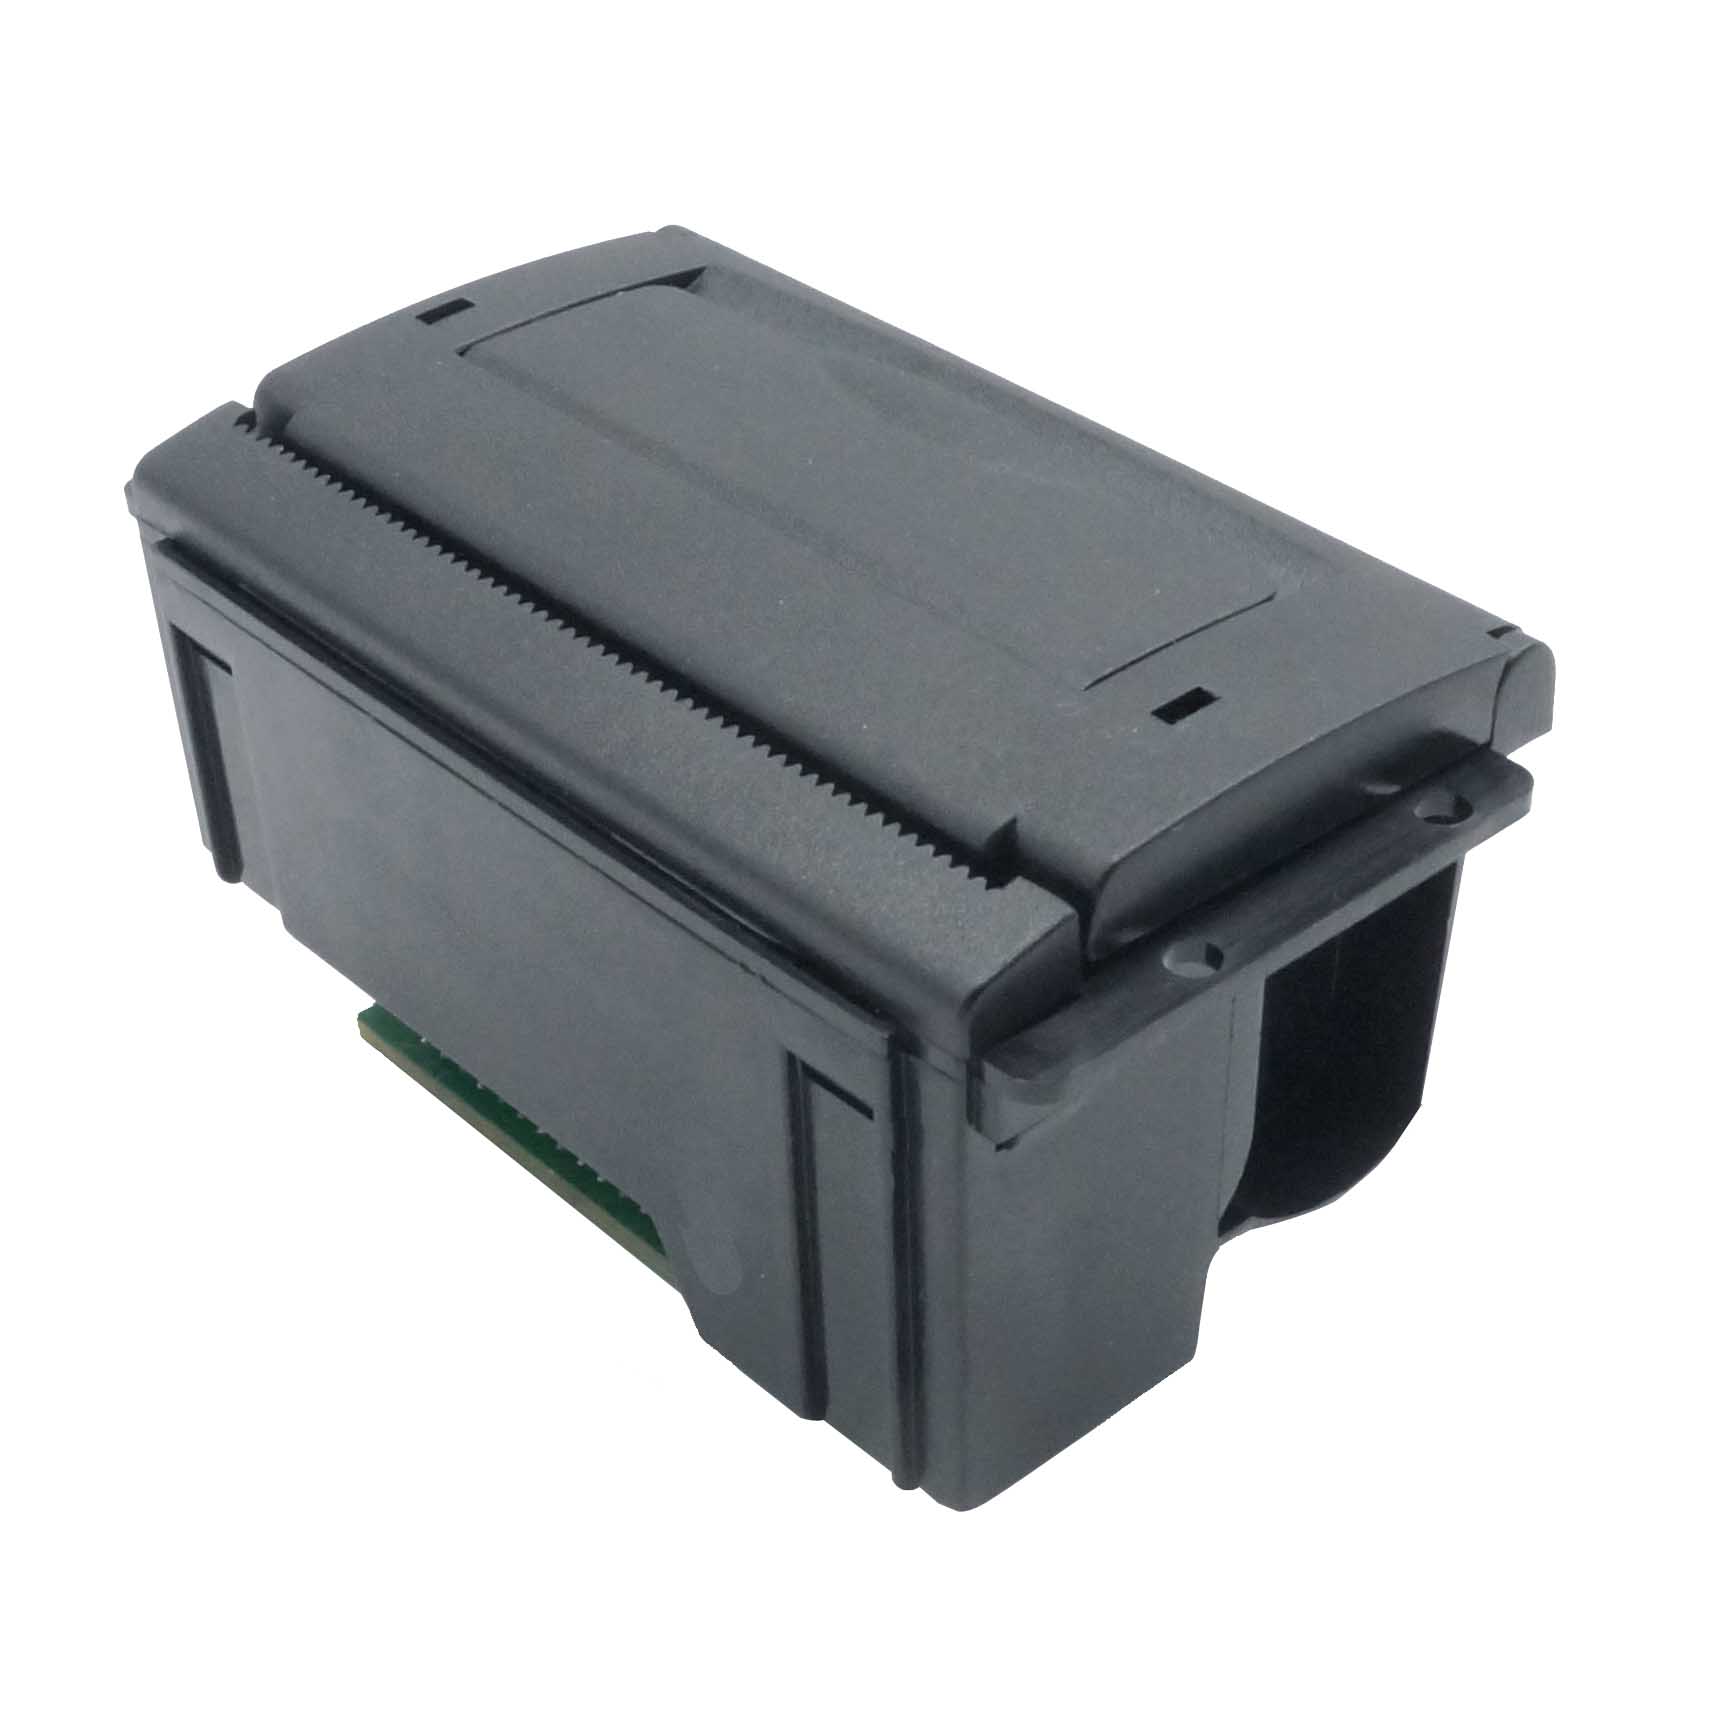 2 inch thermal print module with serial interface